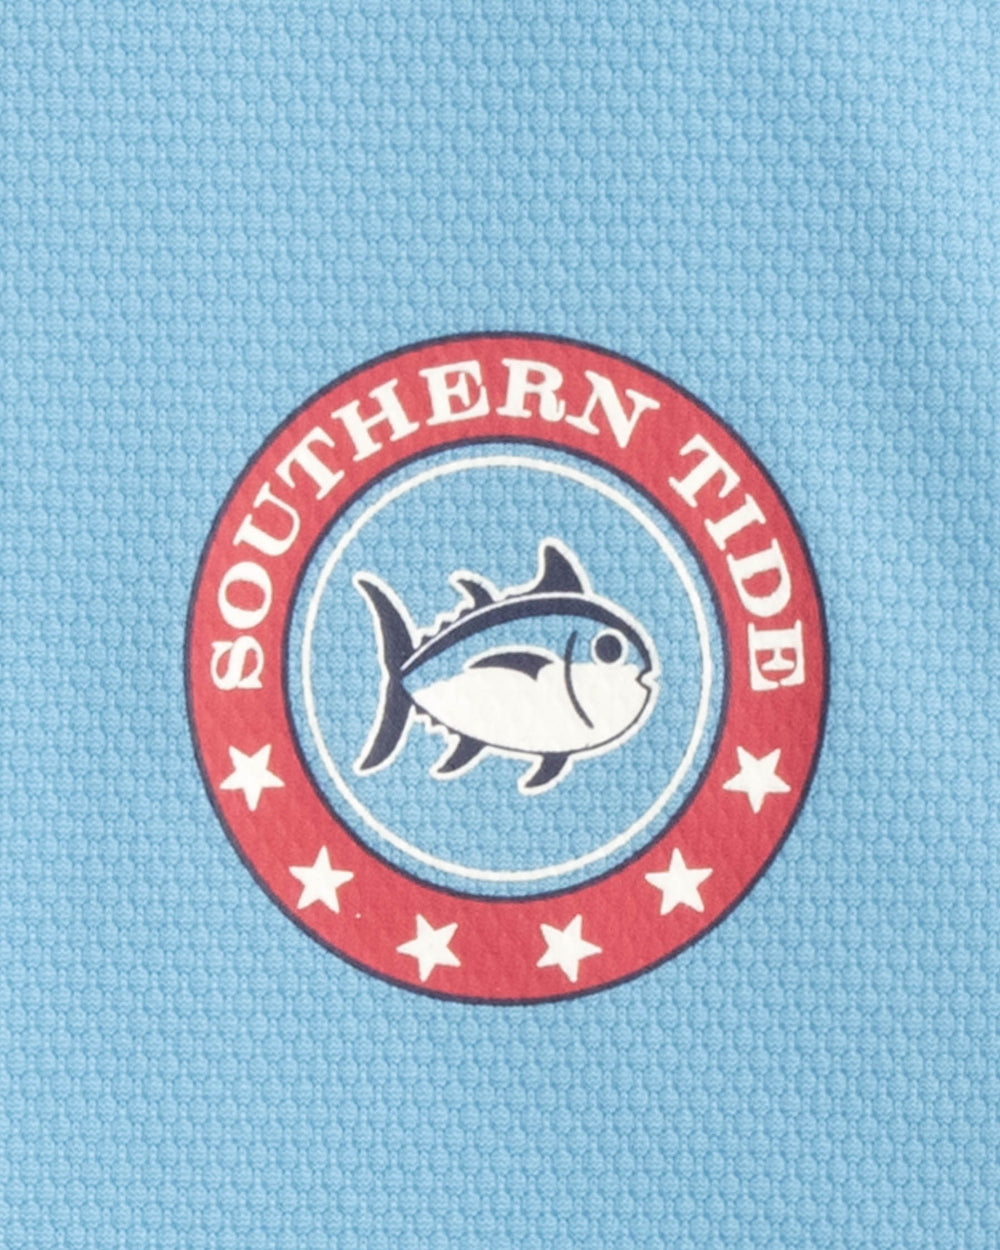 The pocket view of the Star Spangled Skipjack Long Sleeve Performance T-Shirt by Southern Tide - Heritage Blue